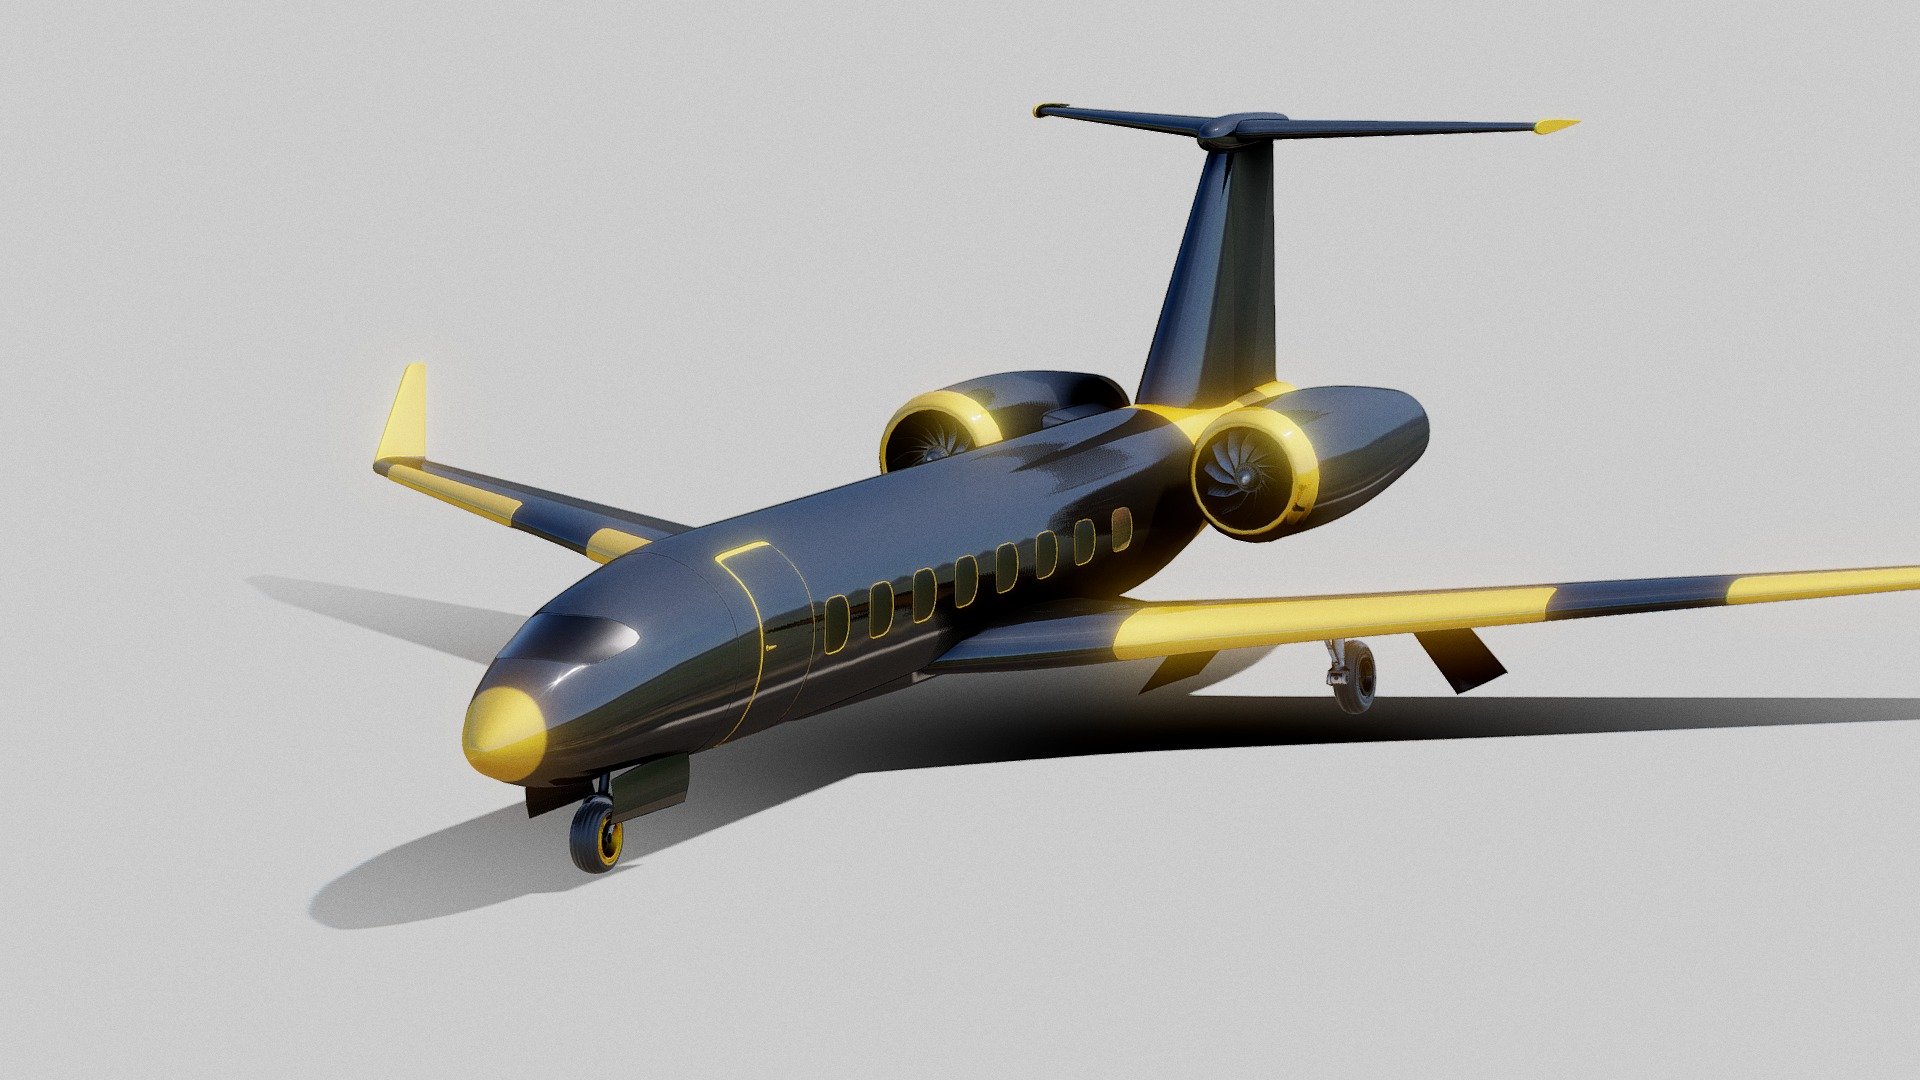 3D Model of a PRIVATE JET 





Software and Version:
   - The model was created using Blender 3D version 3.6.4




Model Details:
   - There are no detailed interior objects for this product.
   - Objects were named by objects and materials.
   - Wheels are jointed with other parts but can be detached to roll separately.
   - Elevators are detached but not rigged.
   - Preview images show how it looks when wheels are pulled in.
   - There is only one texture for the fuselage with windows and stripe details.
   - 2k Texture are provided . 




Statistics:
  Vertices    - 90,887
  Faces        - 87,359
  Triangles  - 174,819



Ready to drop into your 3D scene! Just drag and go for a render with Cycles.

If you have any specific questions or if there's something specific you'd like assistance with regarding this 3D model, feel free to ask! - PRIVATE JET - Buy Royalty Free 3D model by RG_models 3d model